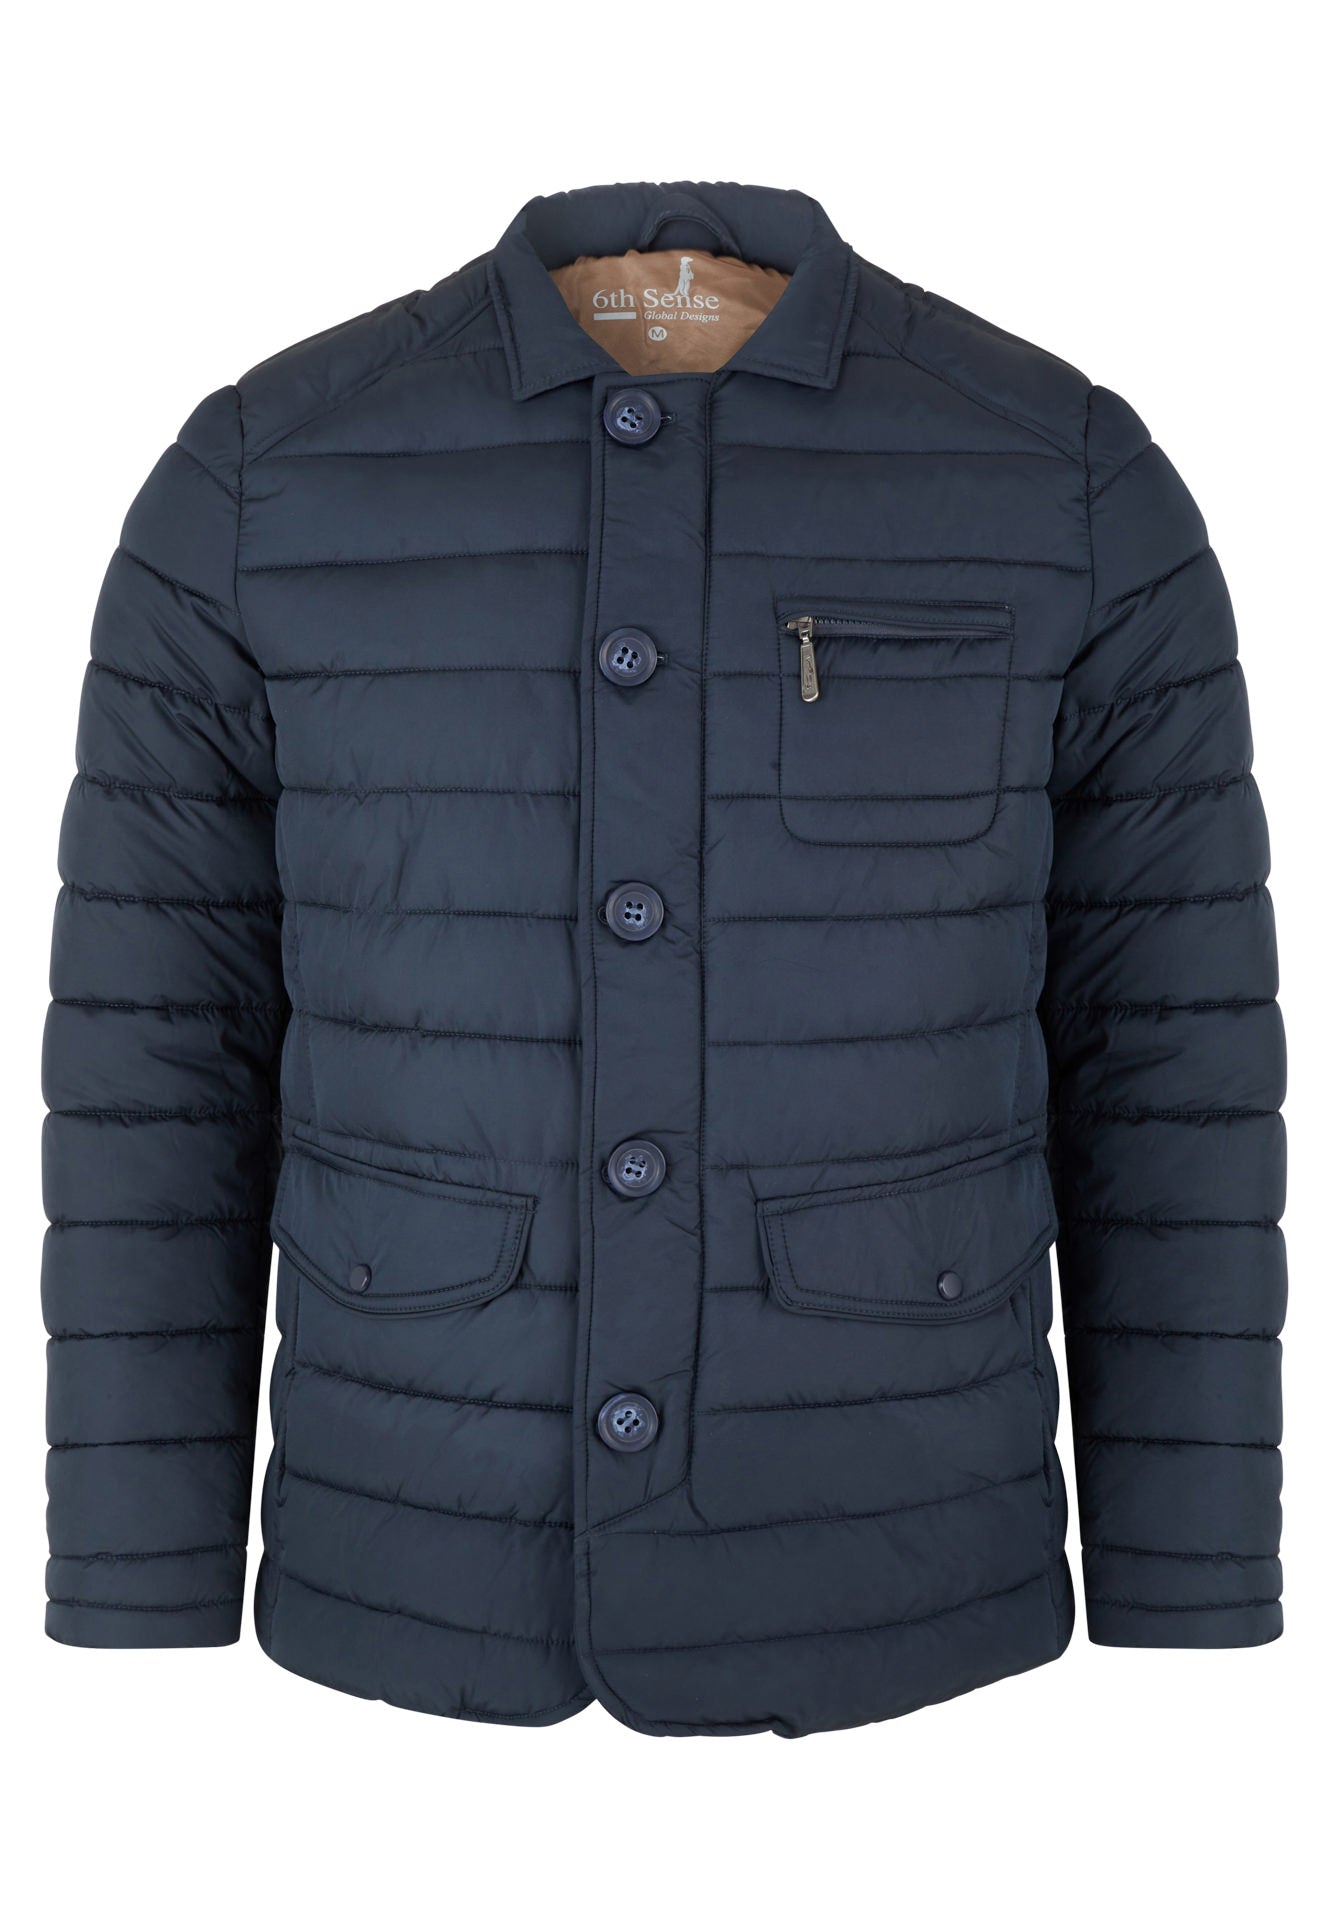 Men's Navy Puffer Jacket By 6th Sense-Front View